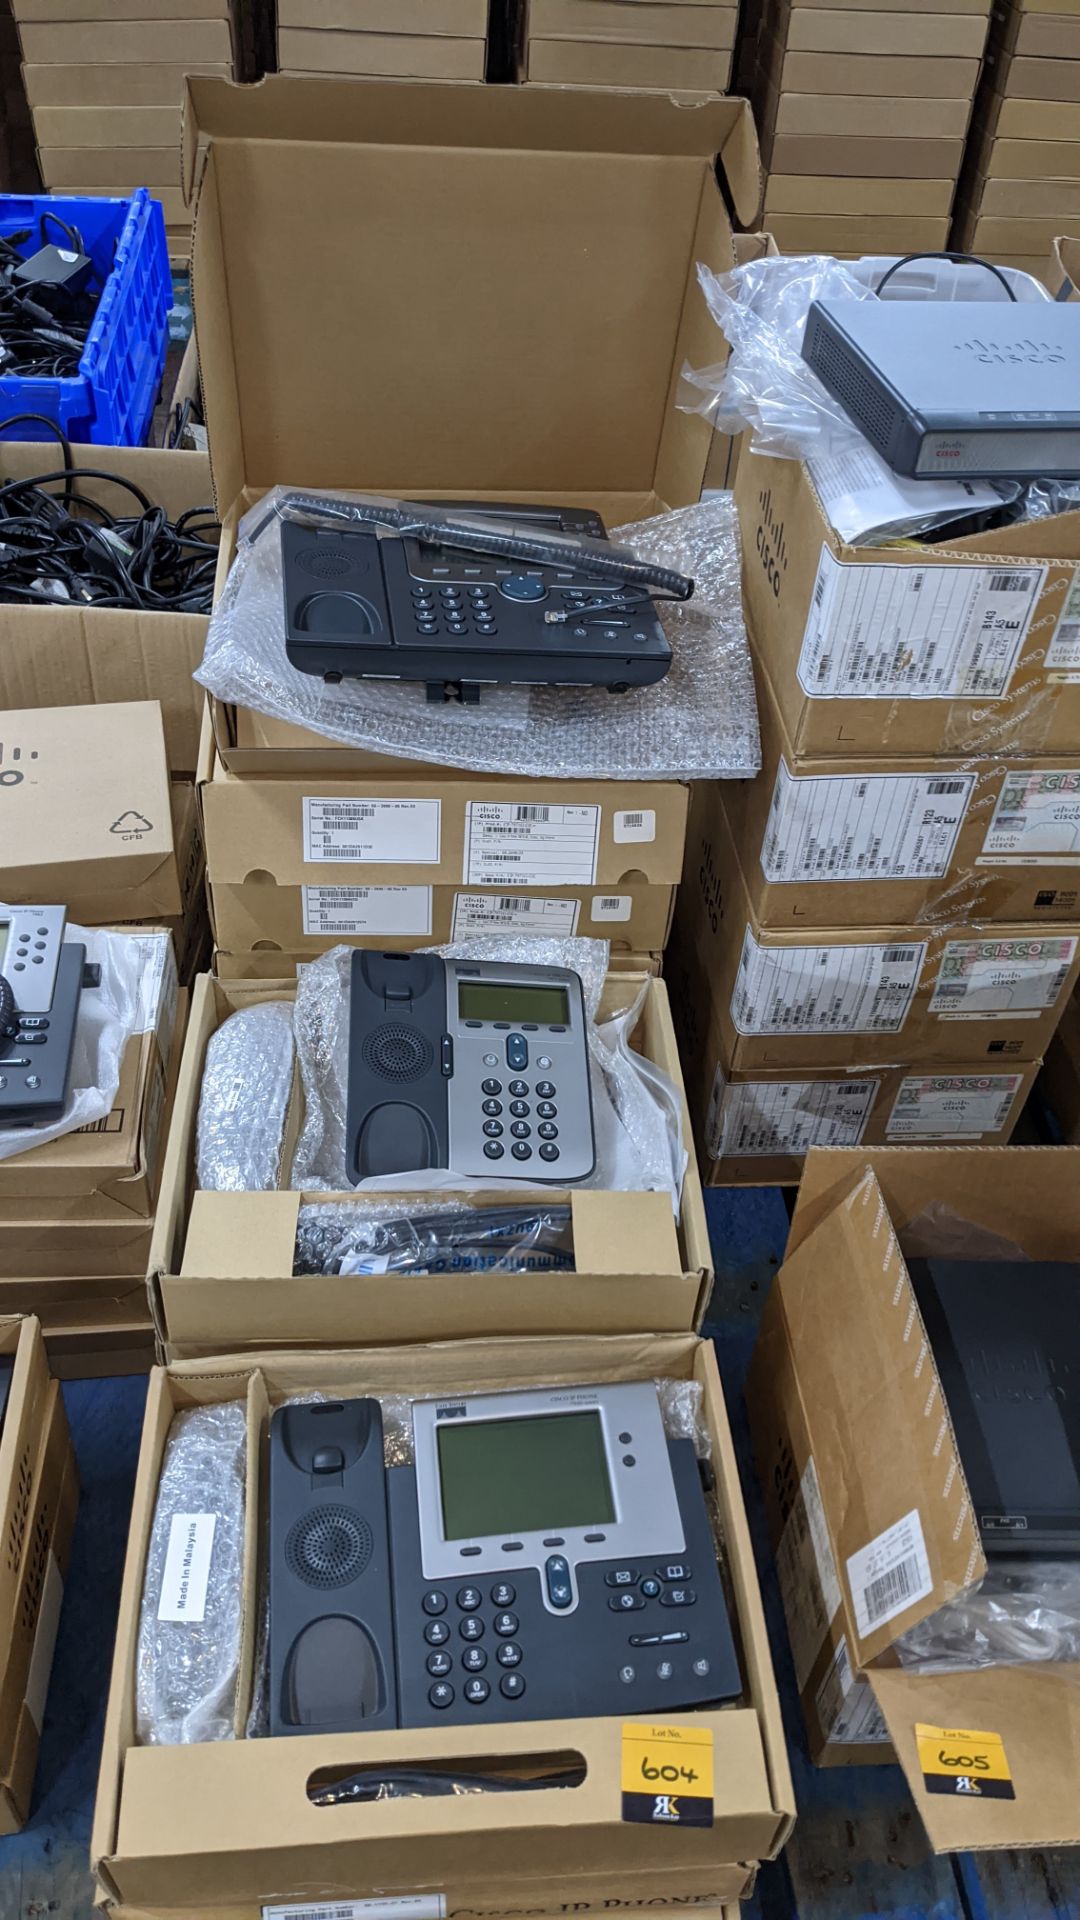 13 off Cisco handsets, model 7940, 7911 & 7971. Appear to be new & unused in Cisco branded boxes